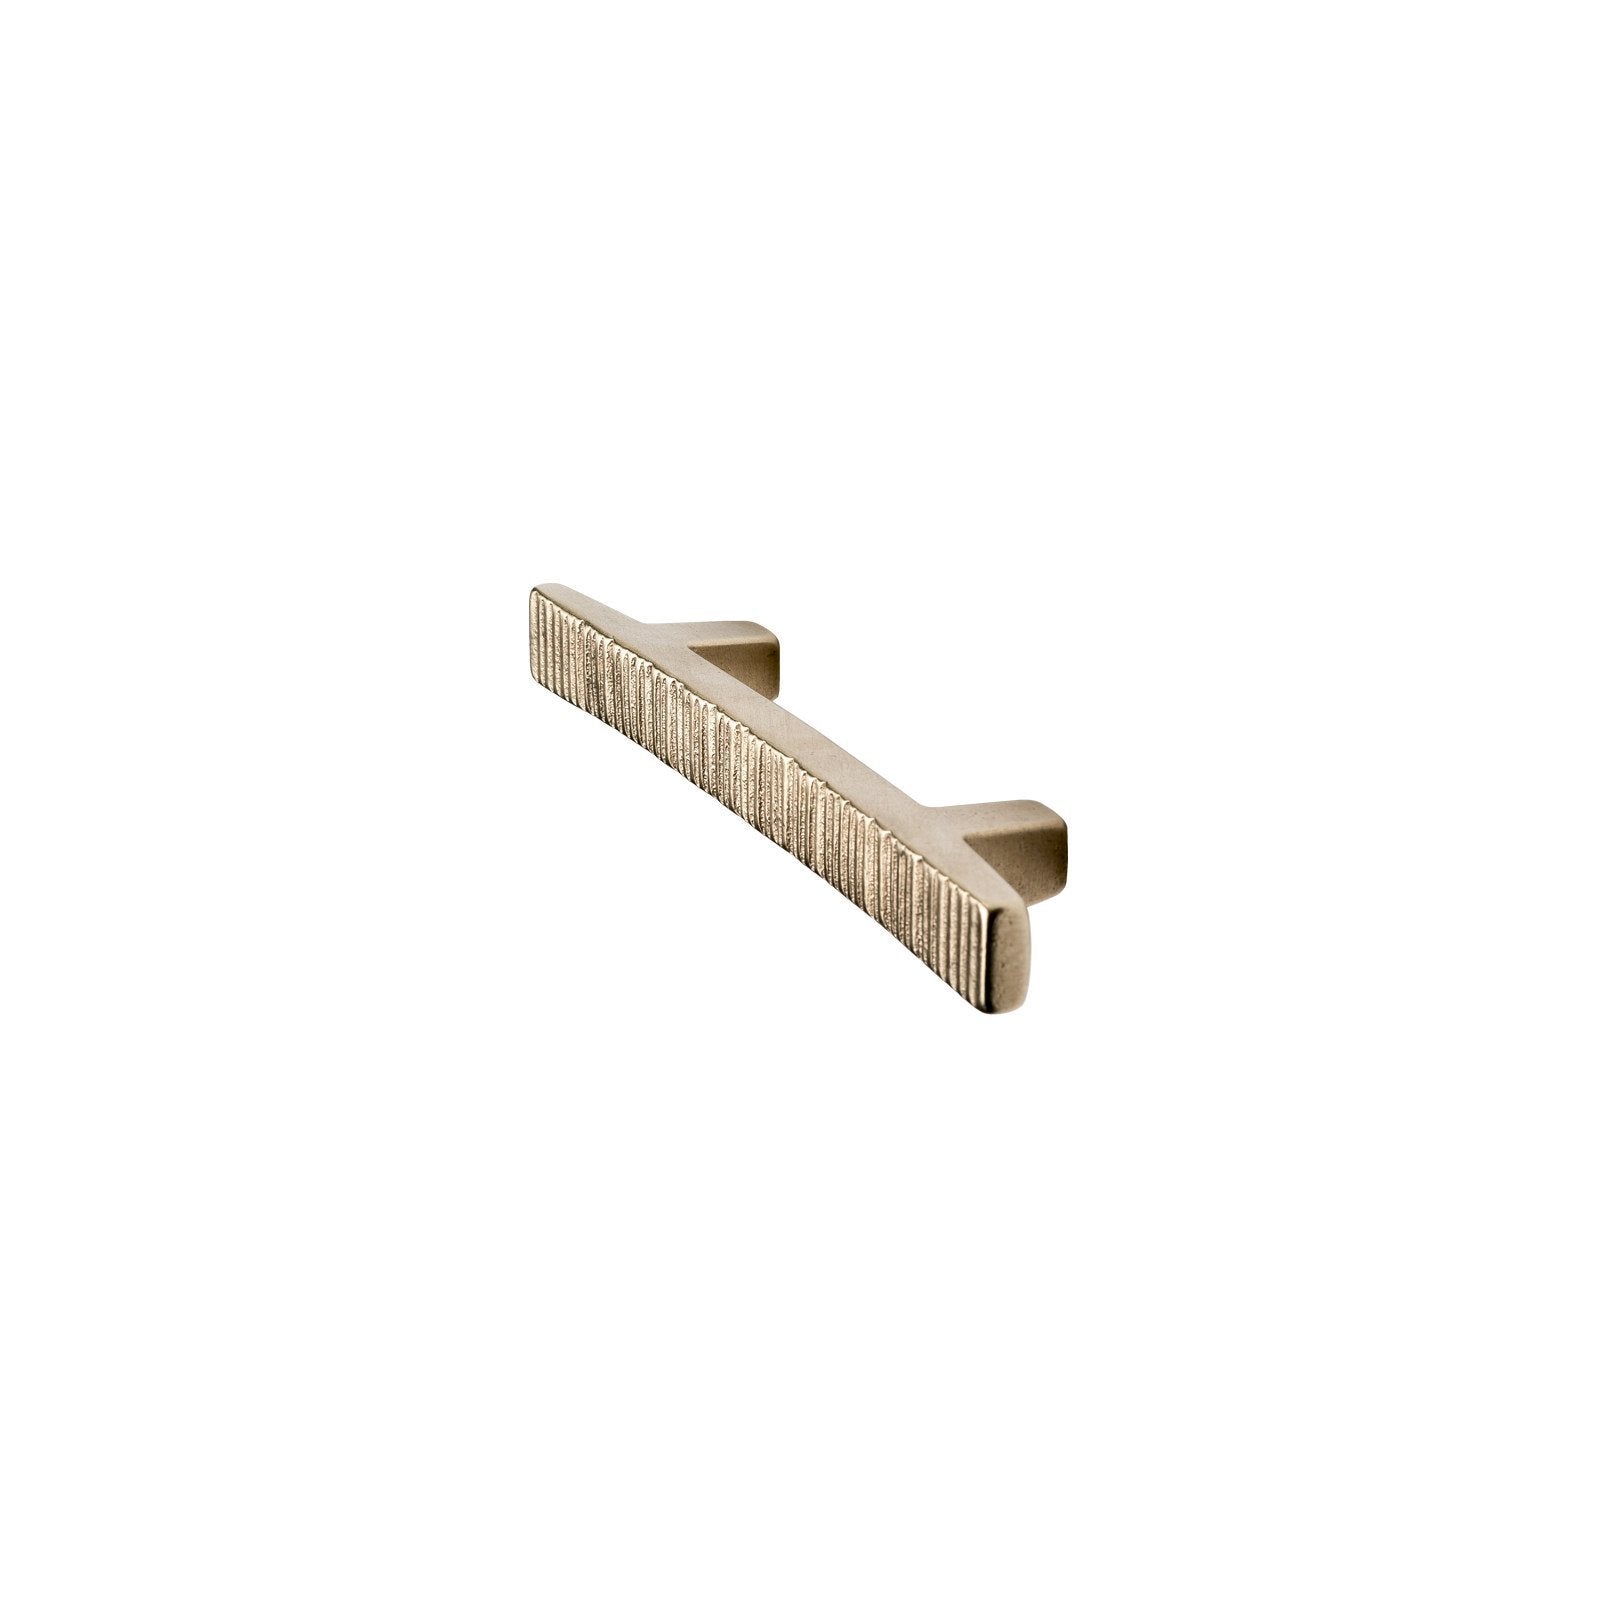 Rocky Mountain Hardware CK20041 - 3 1/2" C-to-C Brut Cabinet Pull